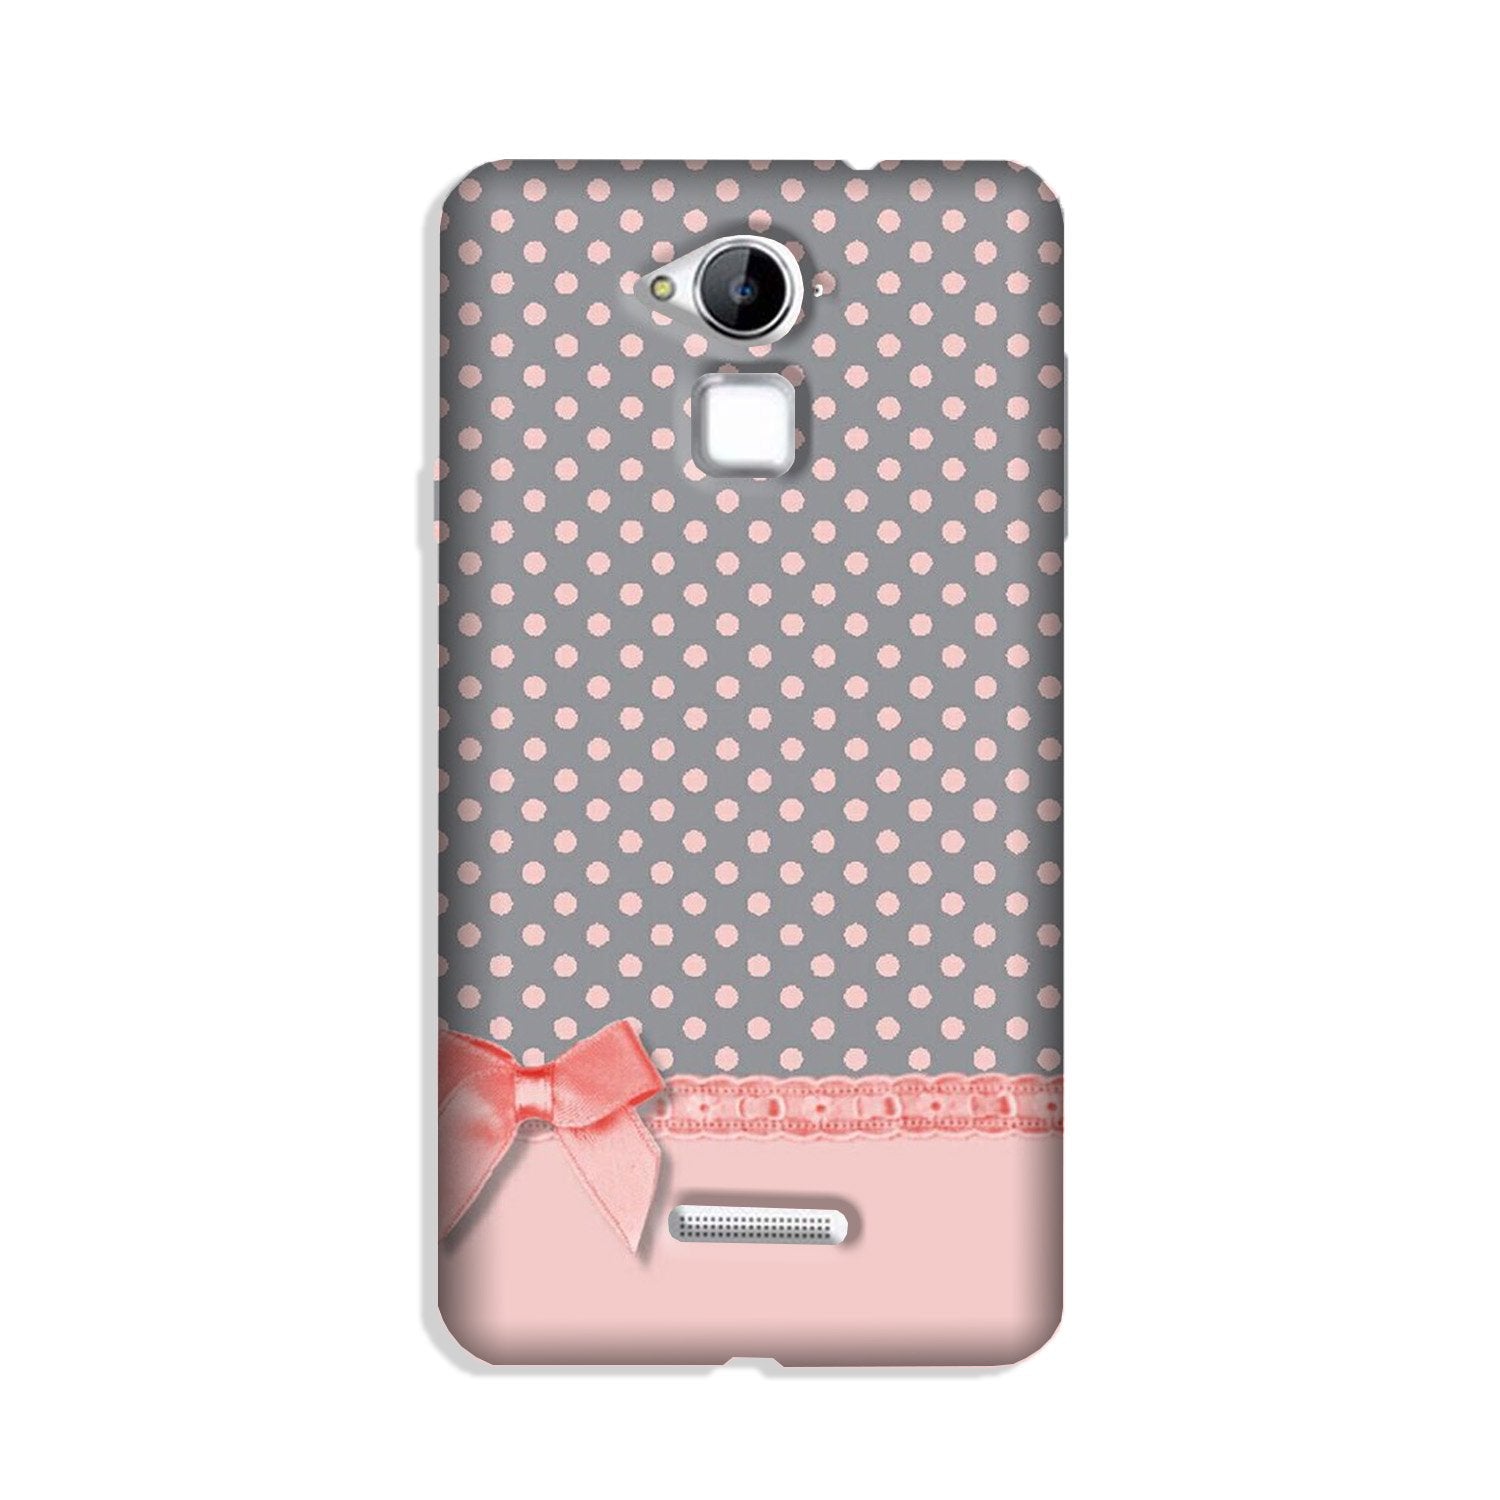 Gift Wrap2 Case for Coolpad Note 3